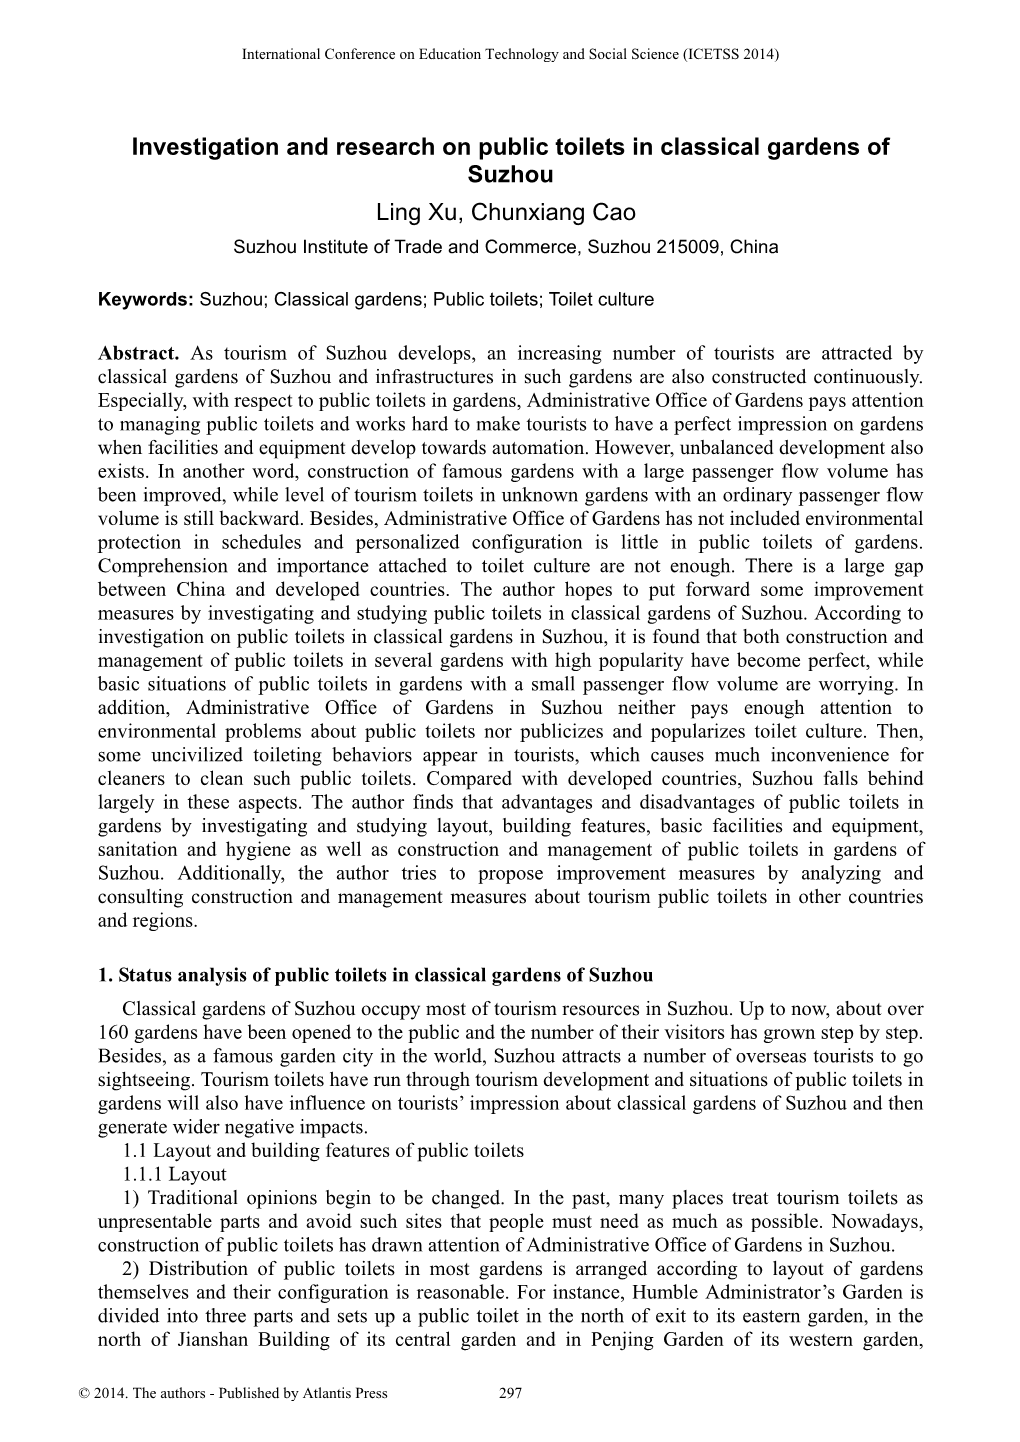 Investigation and Research on Public Toilets in Classical Gardens of Suzhou Ling Xu, Chunxiang Cao Suzhou Institute of Trade and Commerce, Suzhou 215009, China